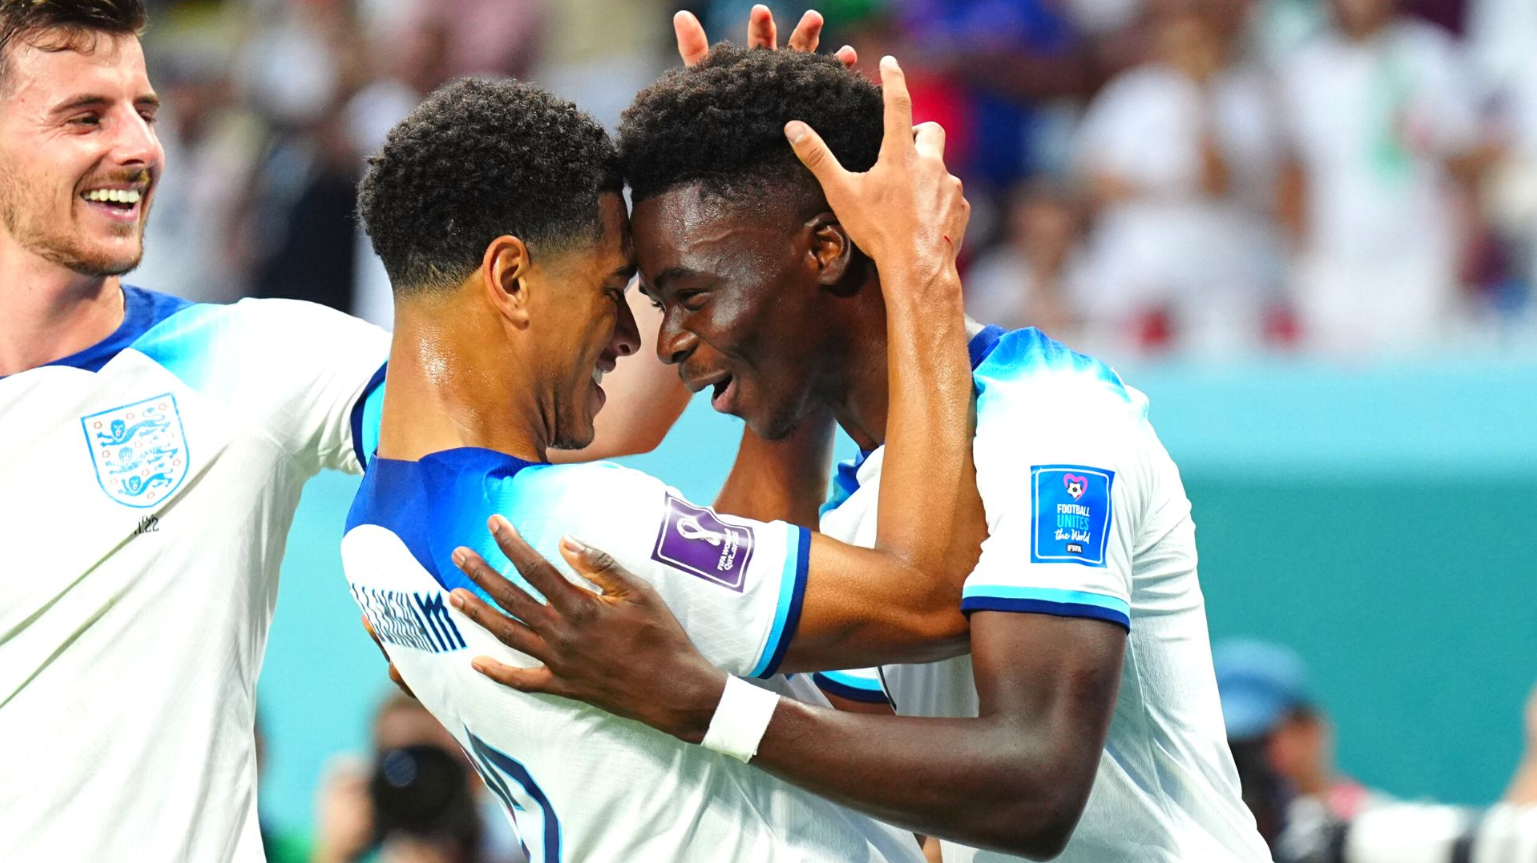 England opened their World Cup 2022 campaign in style as they dismantled Iran 6-2 in the Group B curtain raiser. Saka grabbed the lion's share with a brace